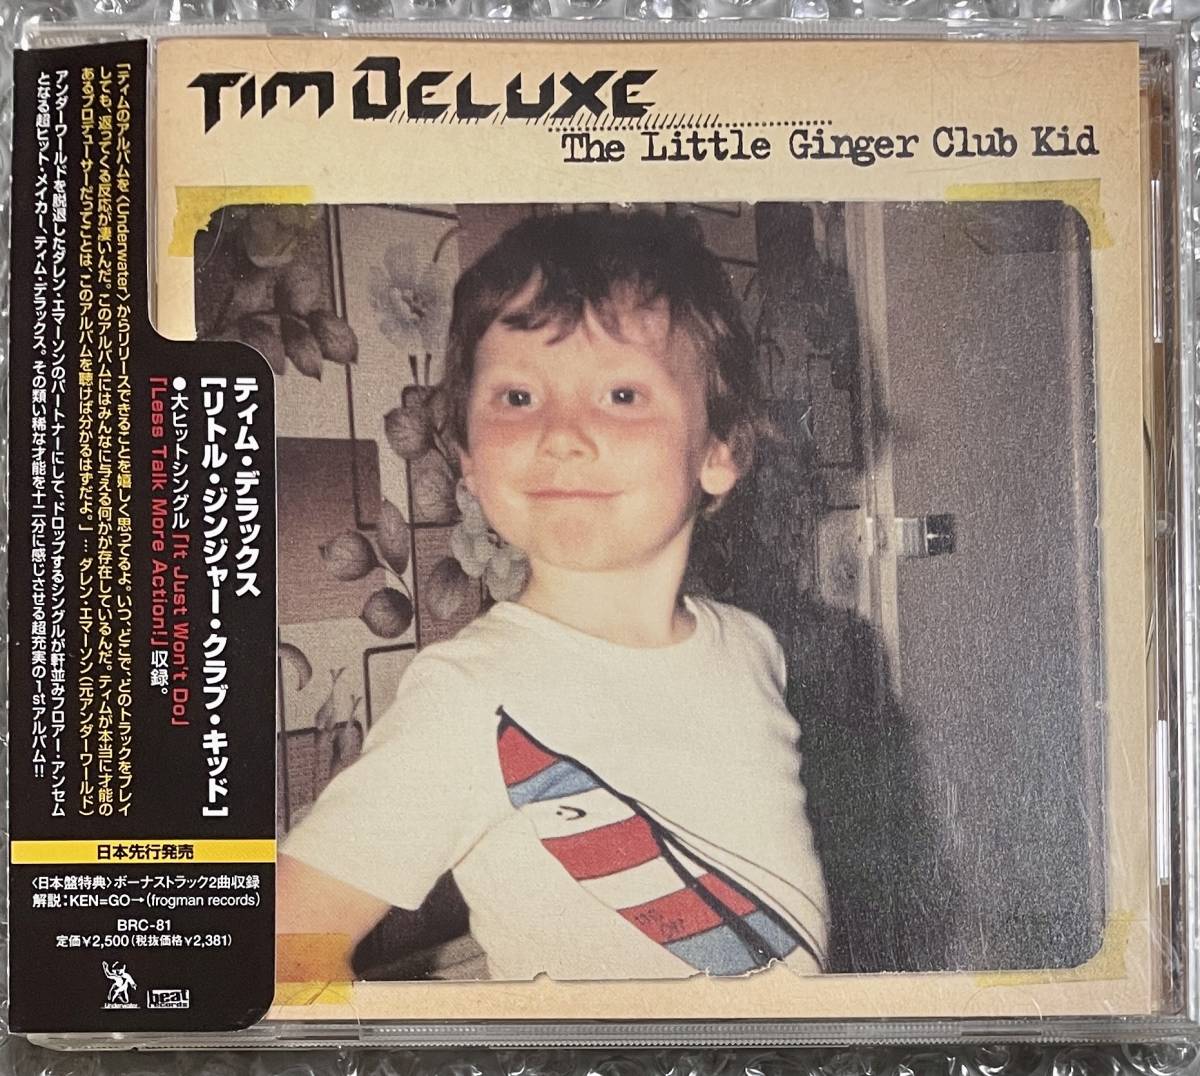 n51 Tim Deluxe The Little Ginger Club Kid 国内盤 帯・ライナー付 Electronic House Downtempo Deep House Nu-Disco 中古品_画像1